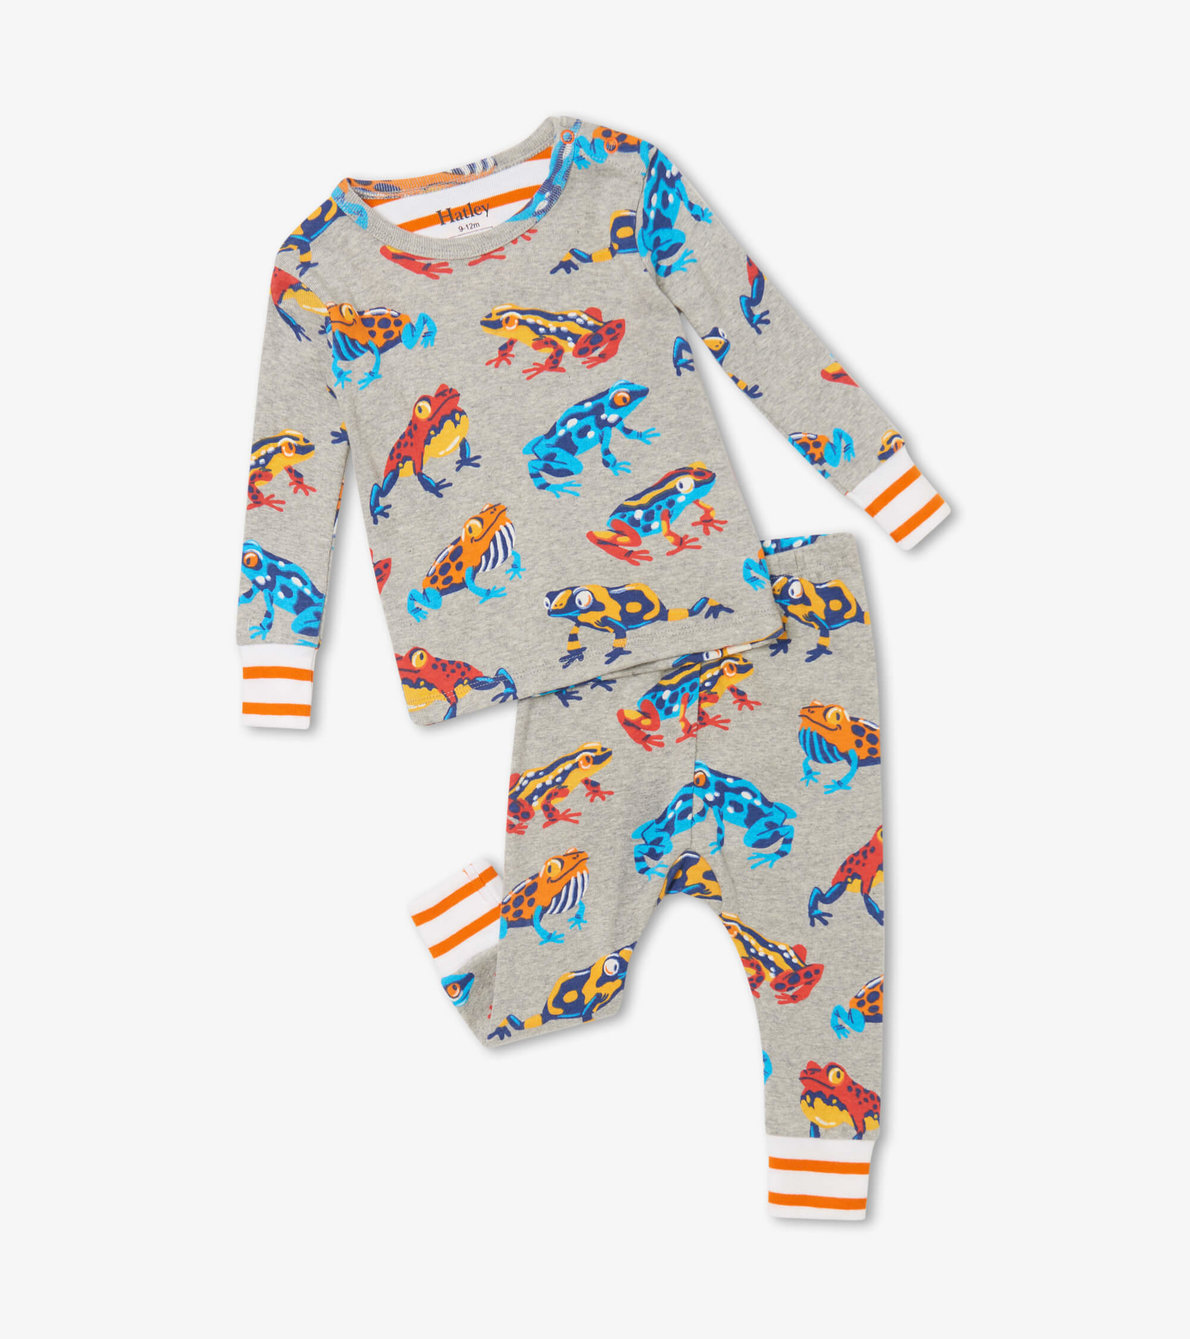 View larger image of Leaping Frogs Organic Cotton Baby Pajama Set